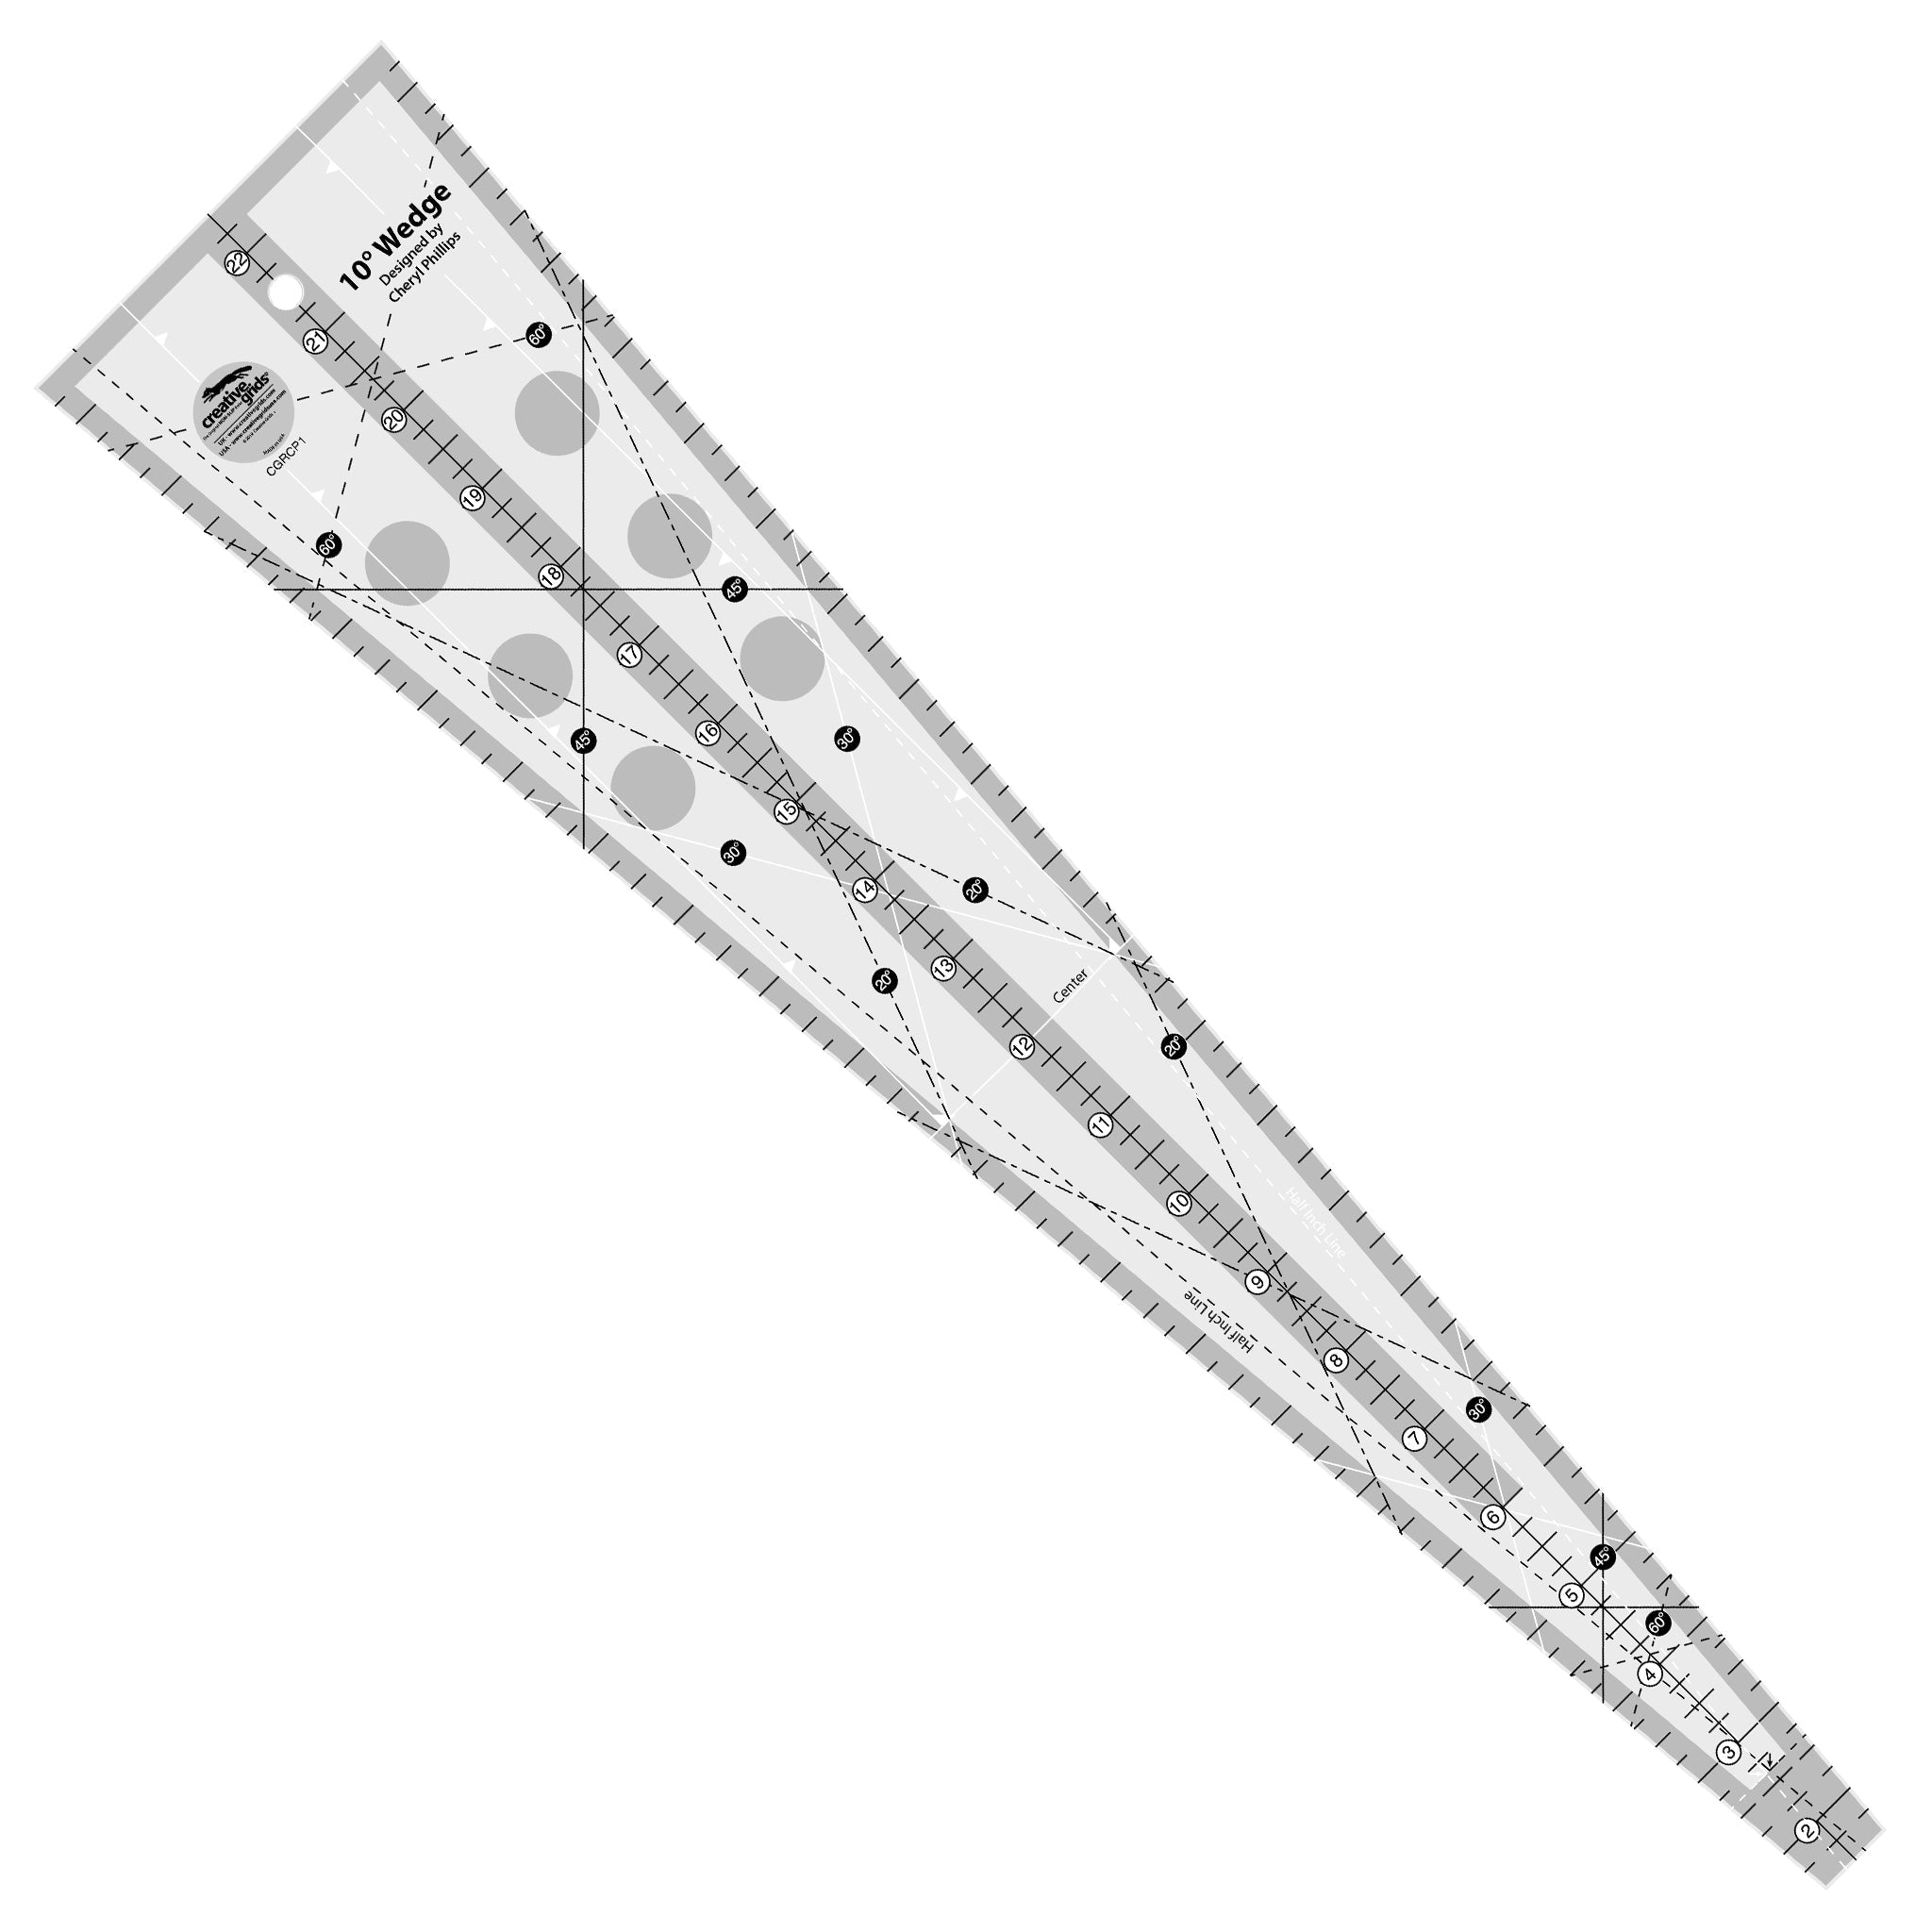 Creative Grids 10 Degree Wedge Ruler by Cheryl Phillips (CGRCP1)